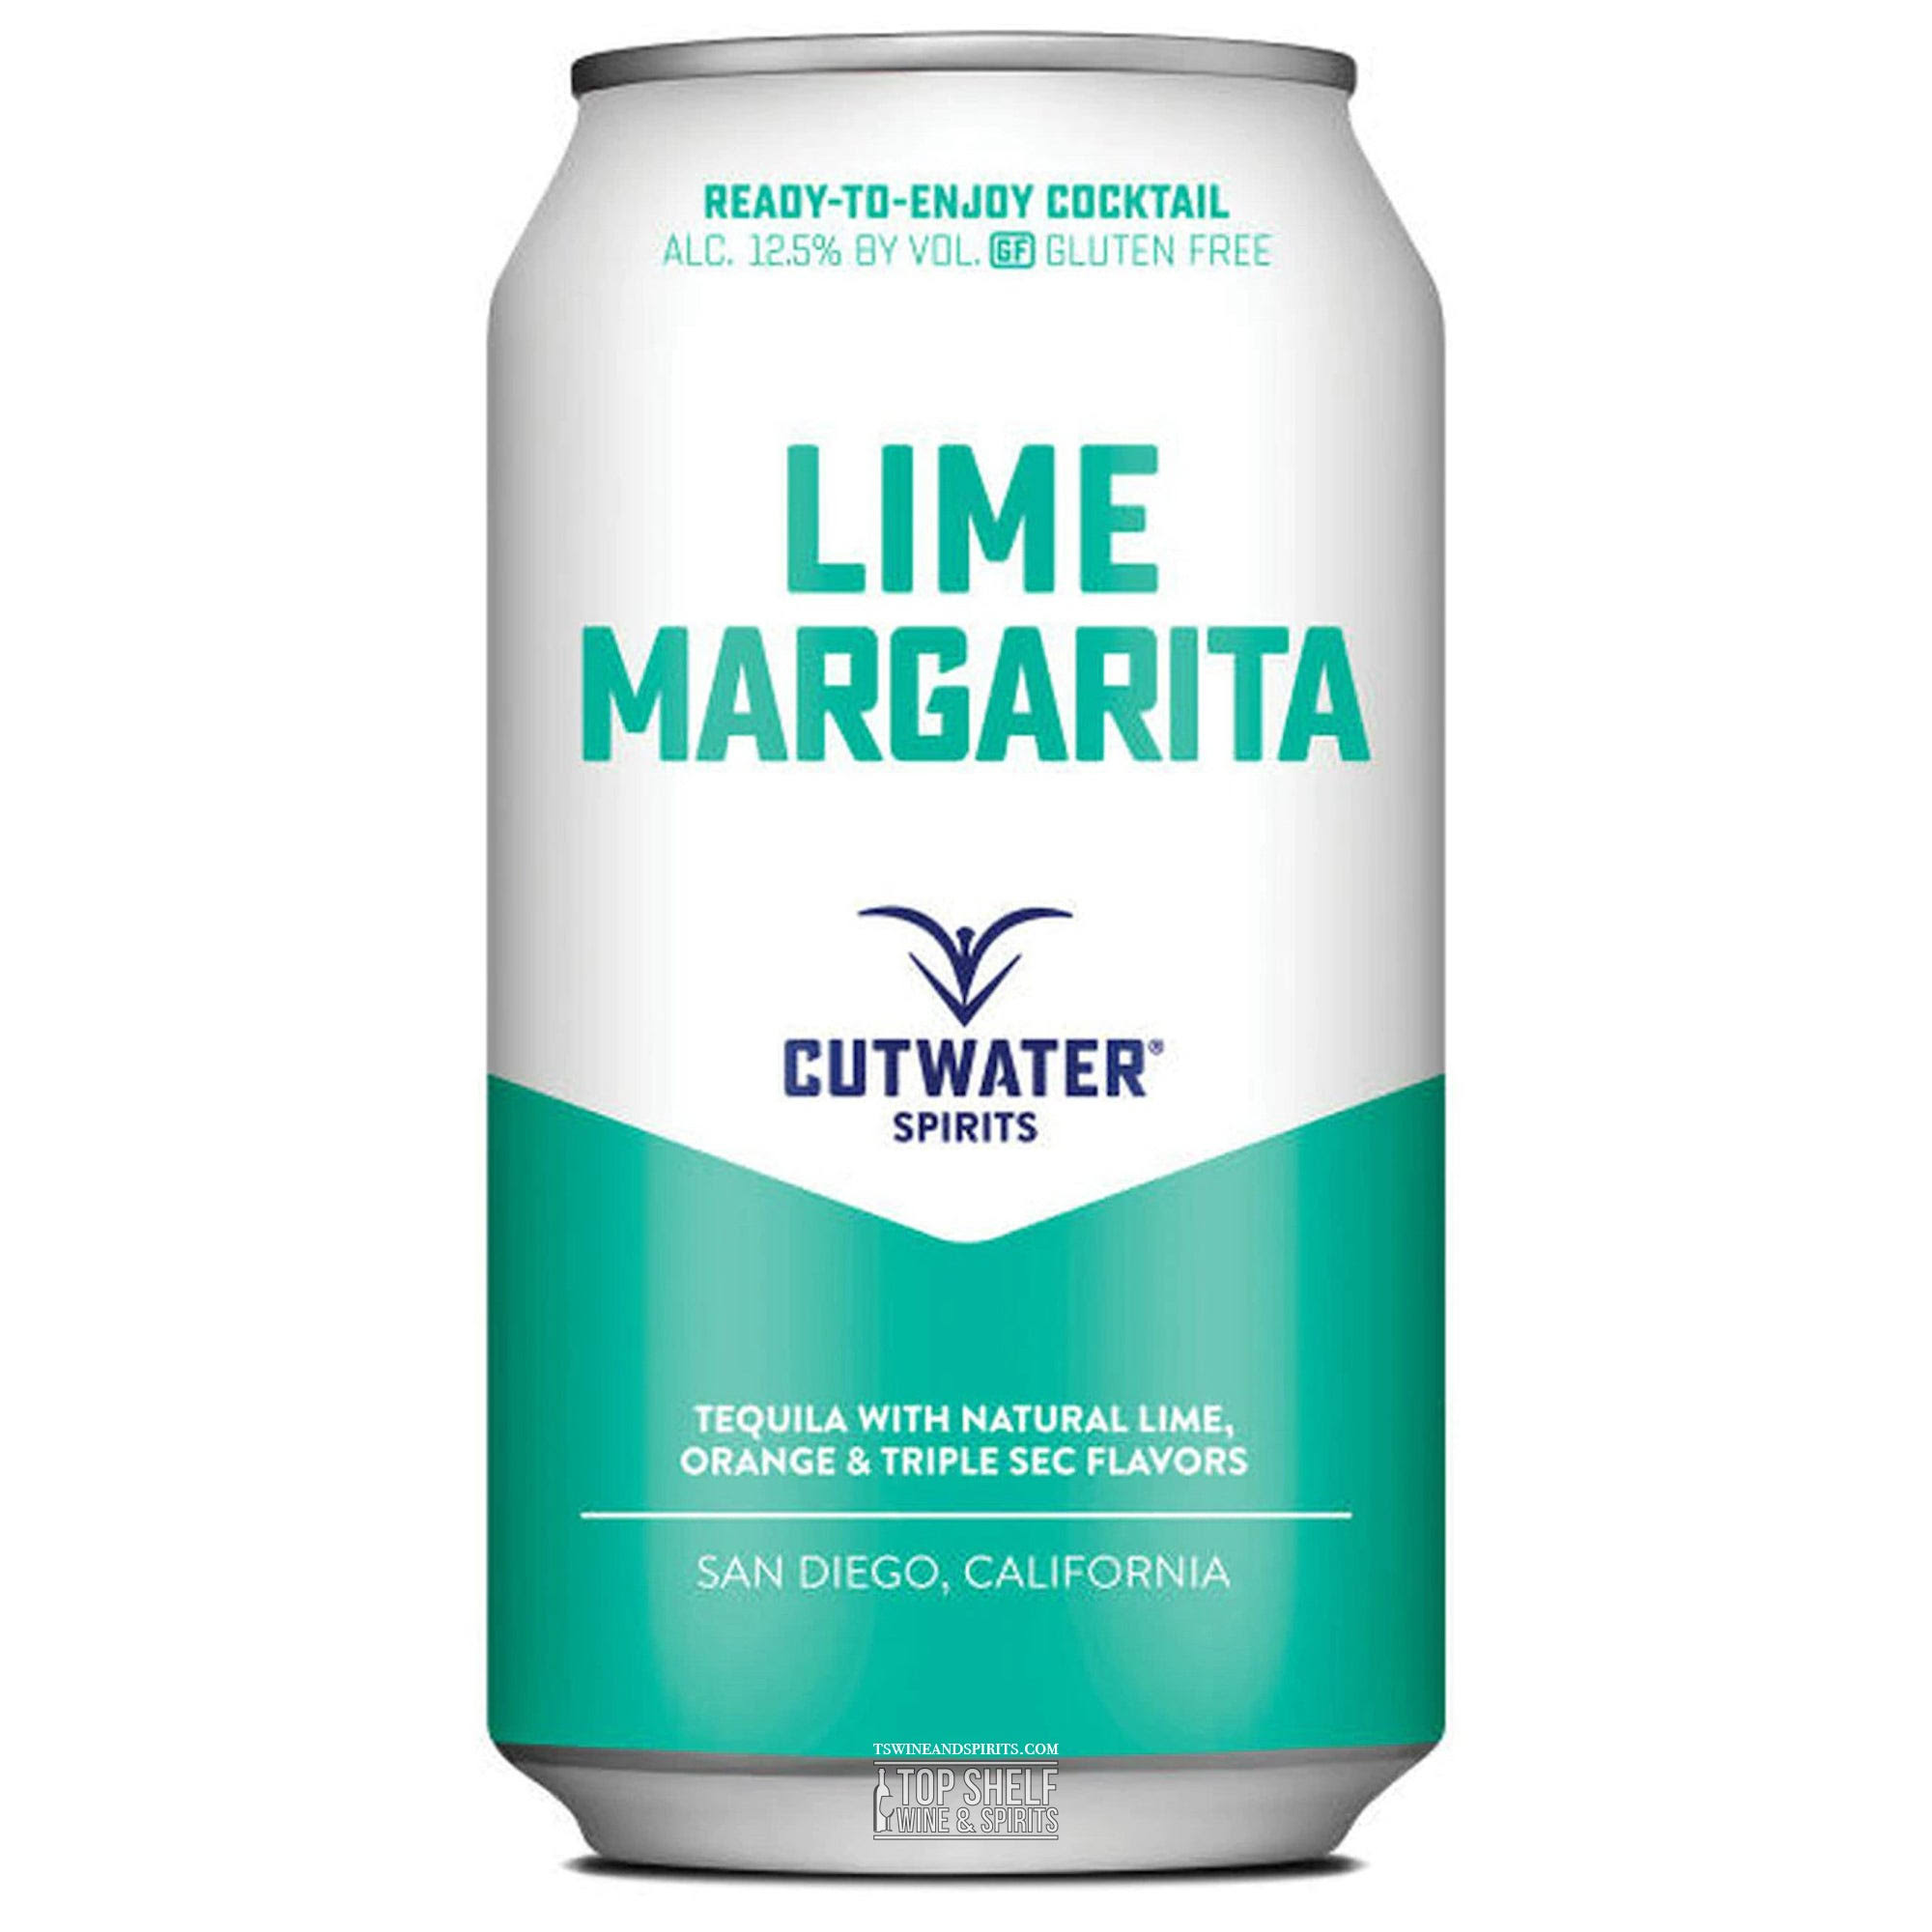 Cutwater Tequila Margarita (4 x 355ml) Pre-Bottled Cocktails